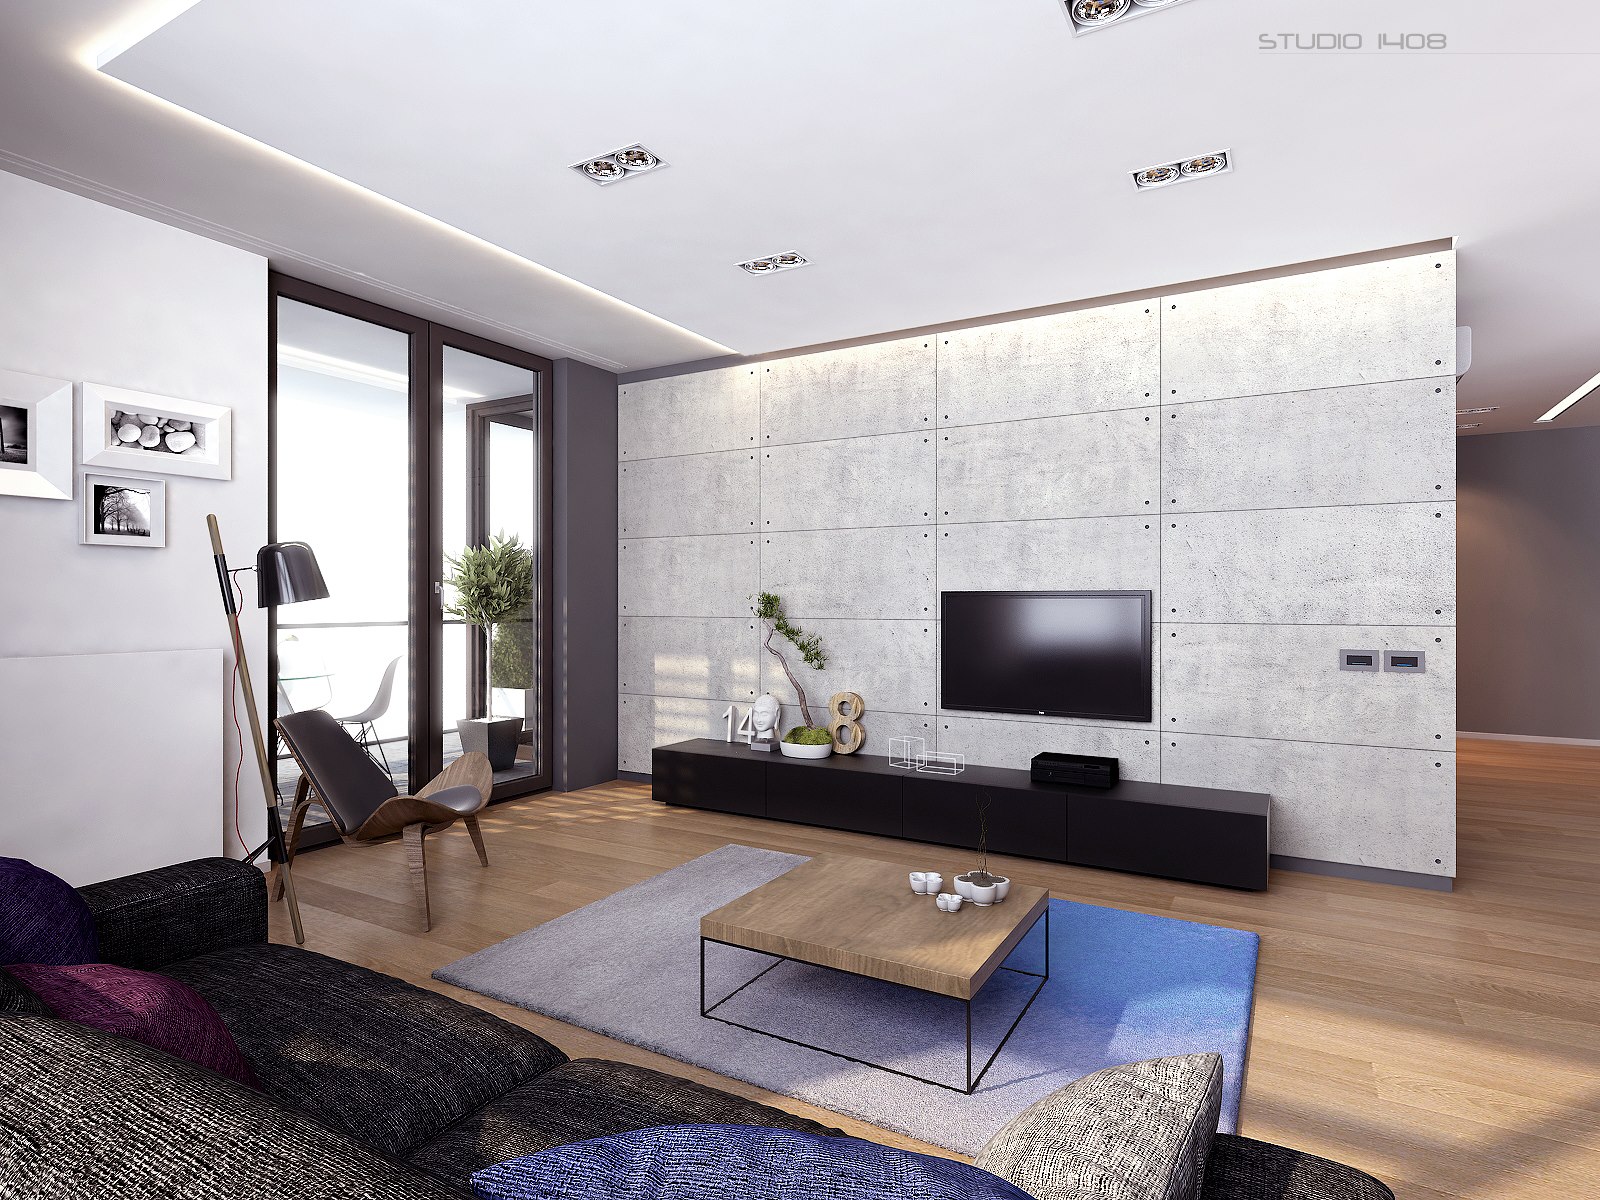 A modern living room with concrete walls and a tv showcases minimalist interior design.